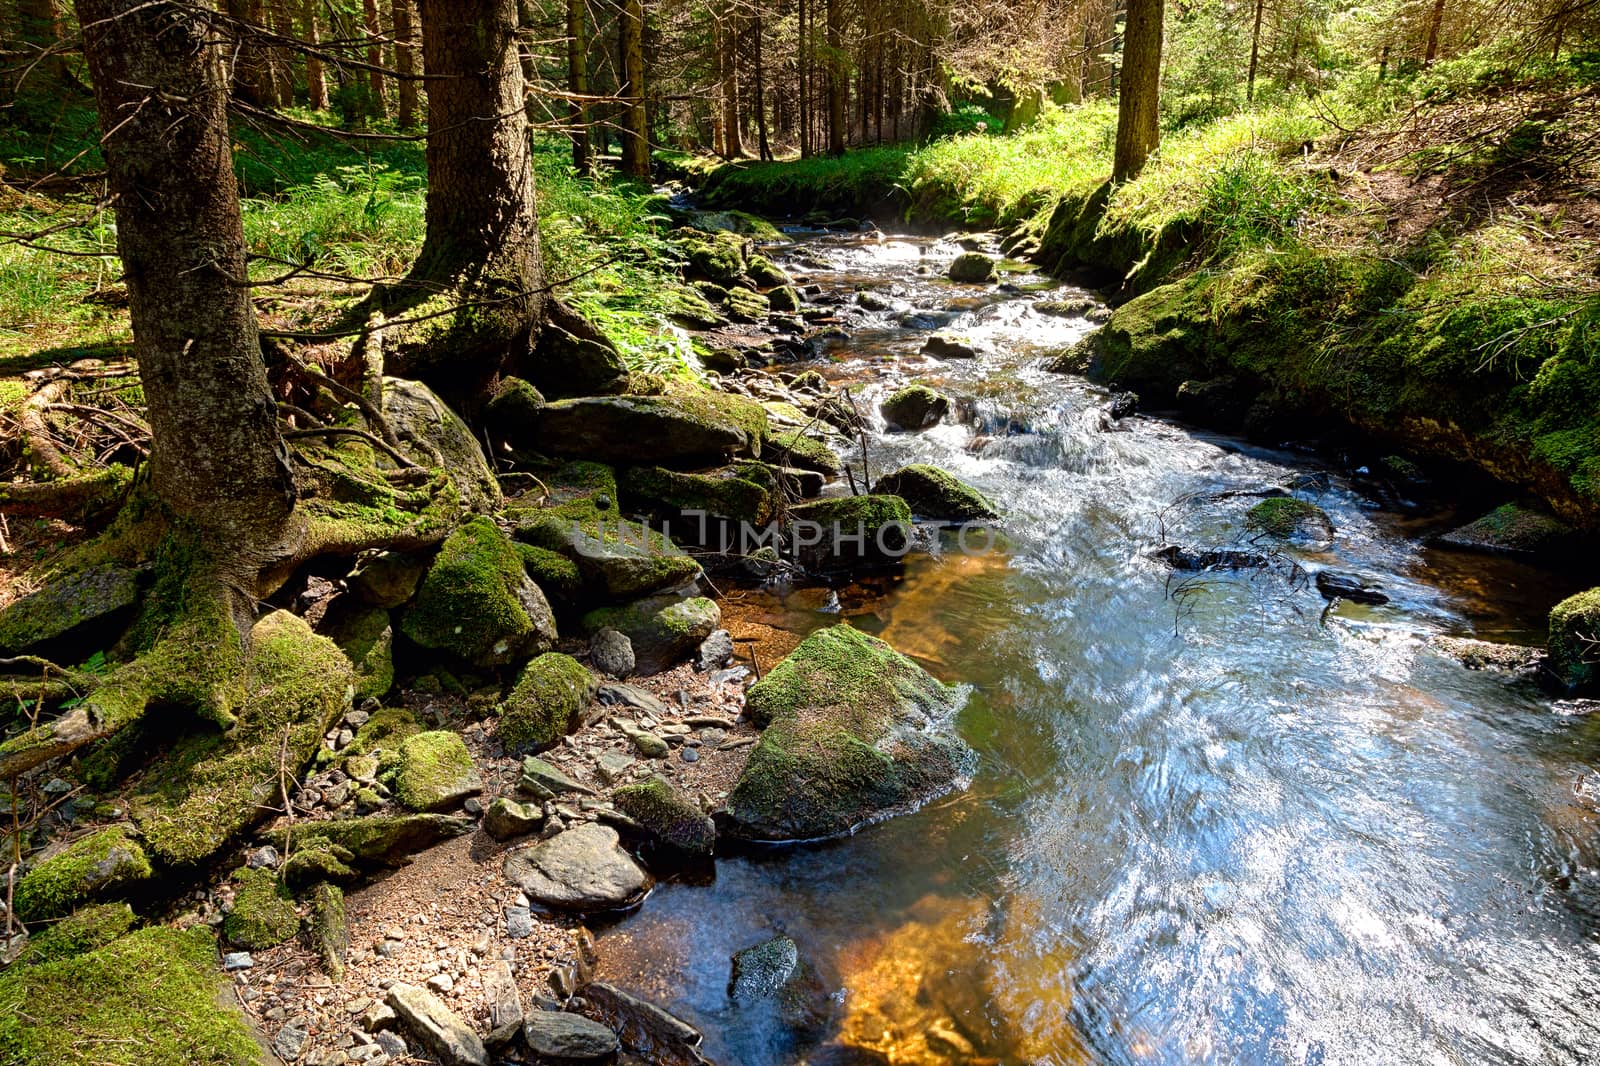 The primeval forest with the creek - HDR by hanusst